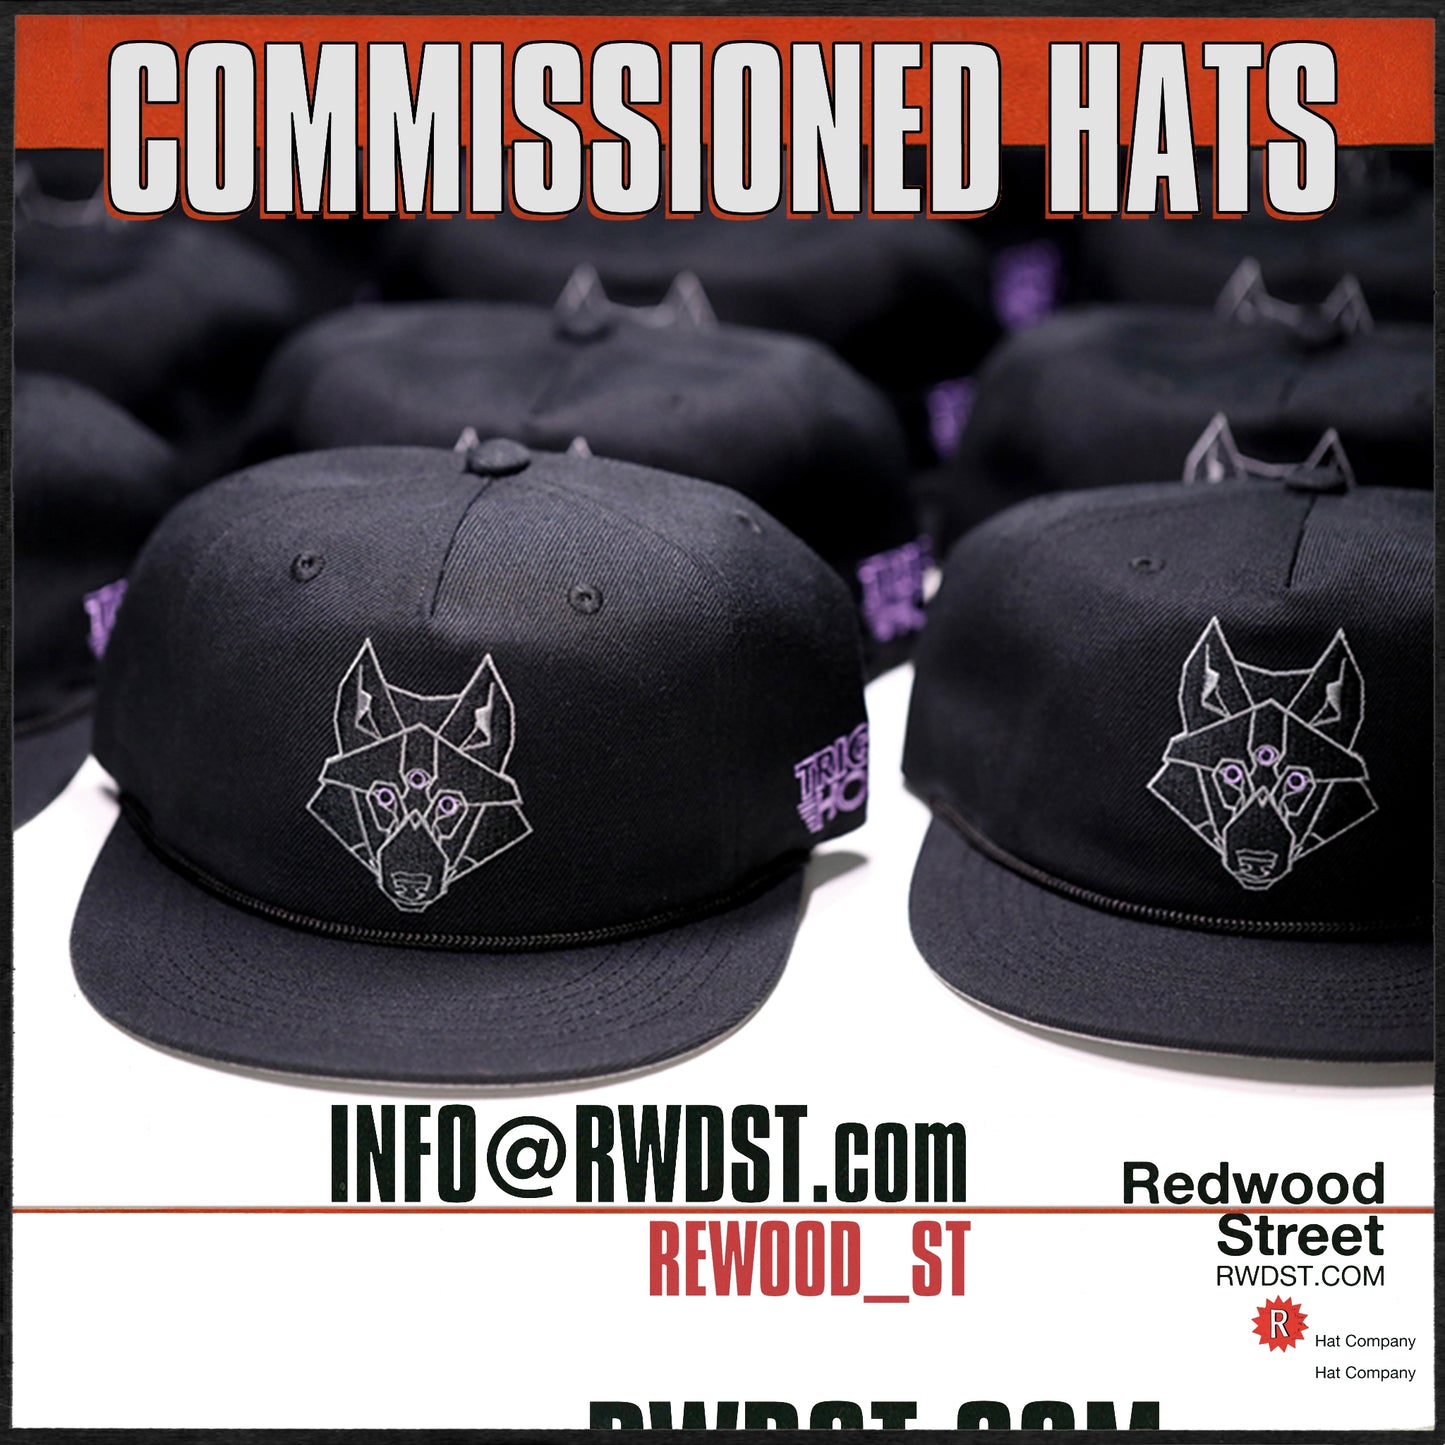 Commissioned Hats